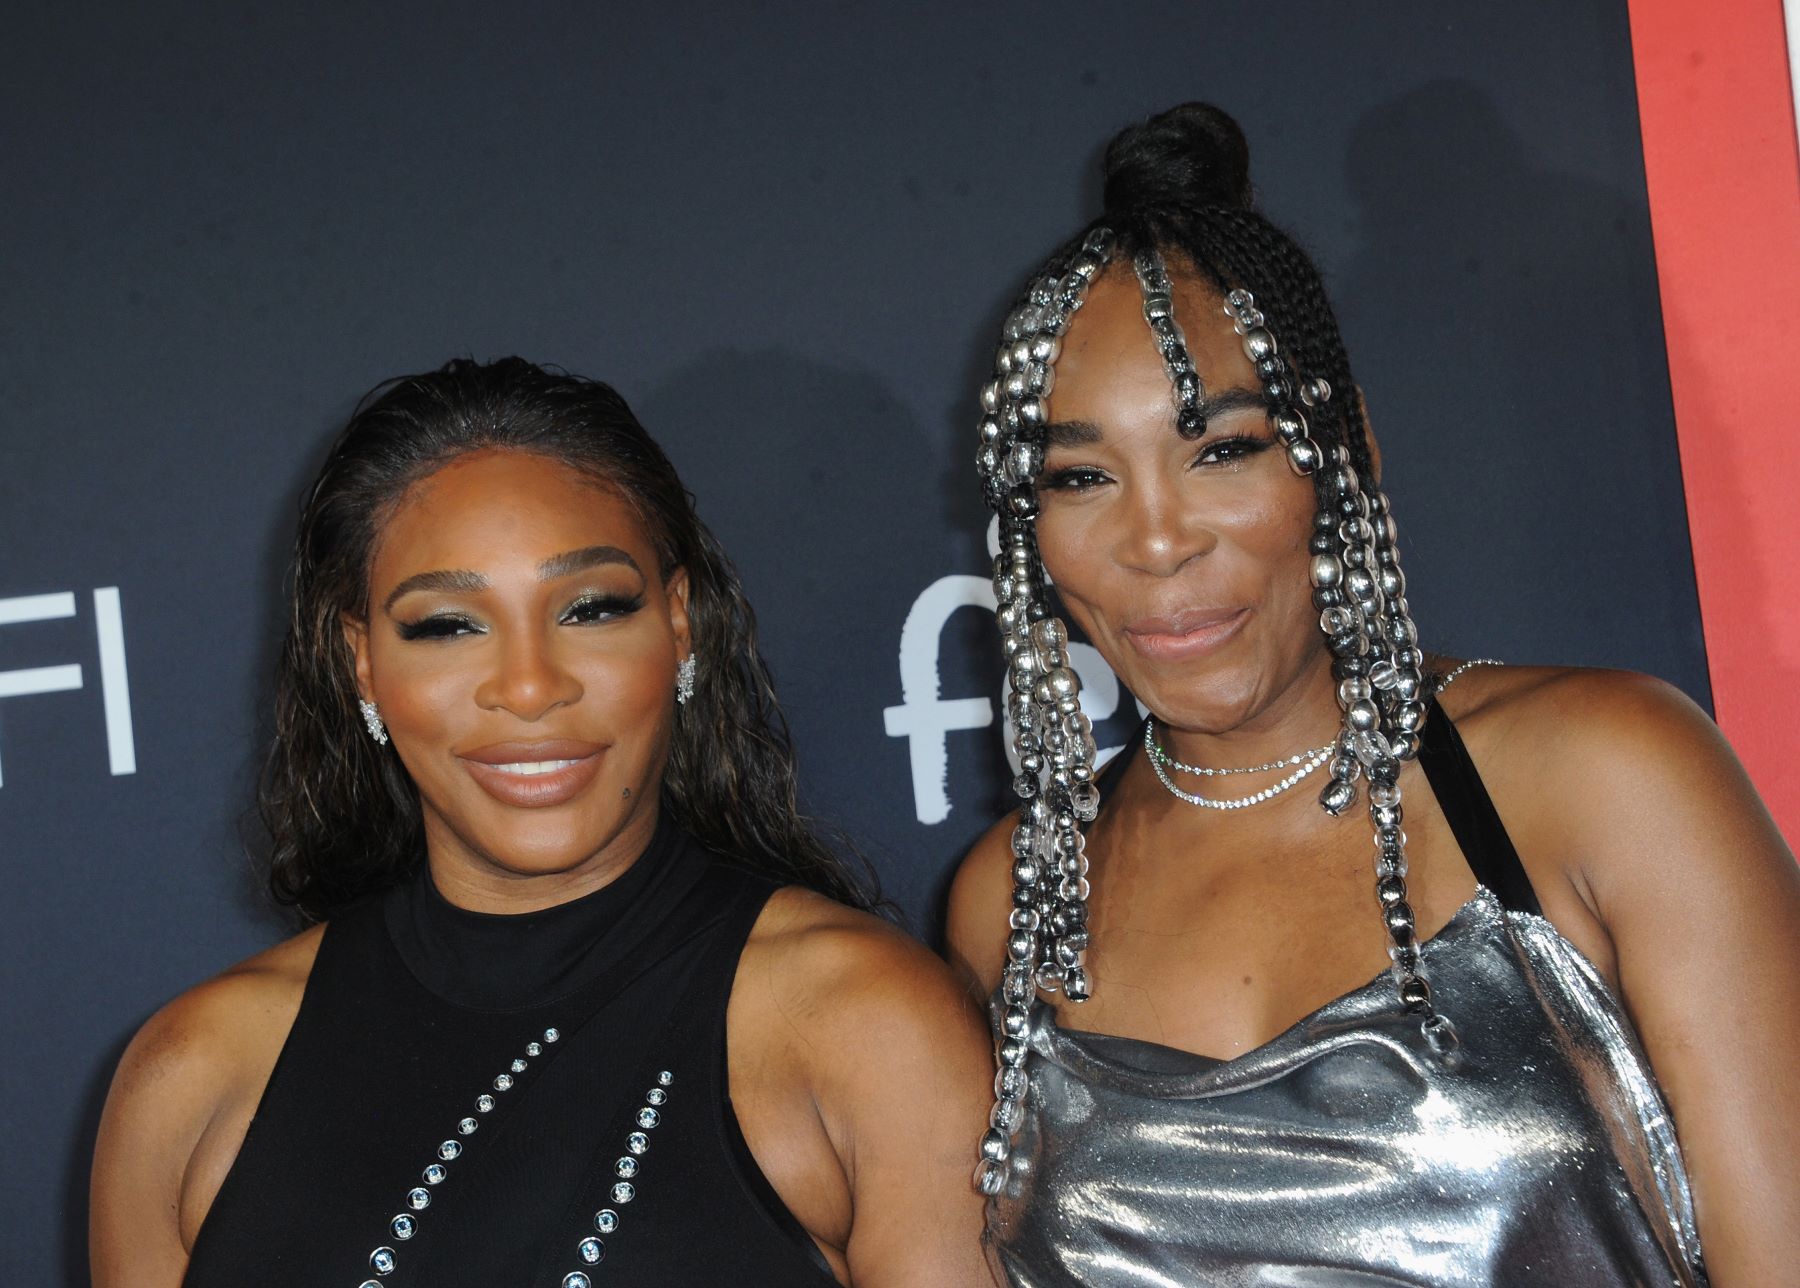 Tennis stars Serena Williams and Venus Williams attending a premiere of 'King Richard' in Hollywood, California